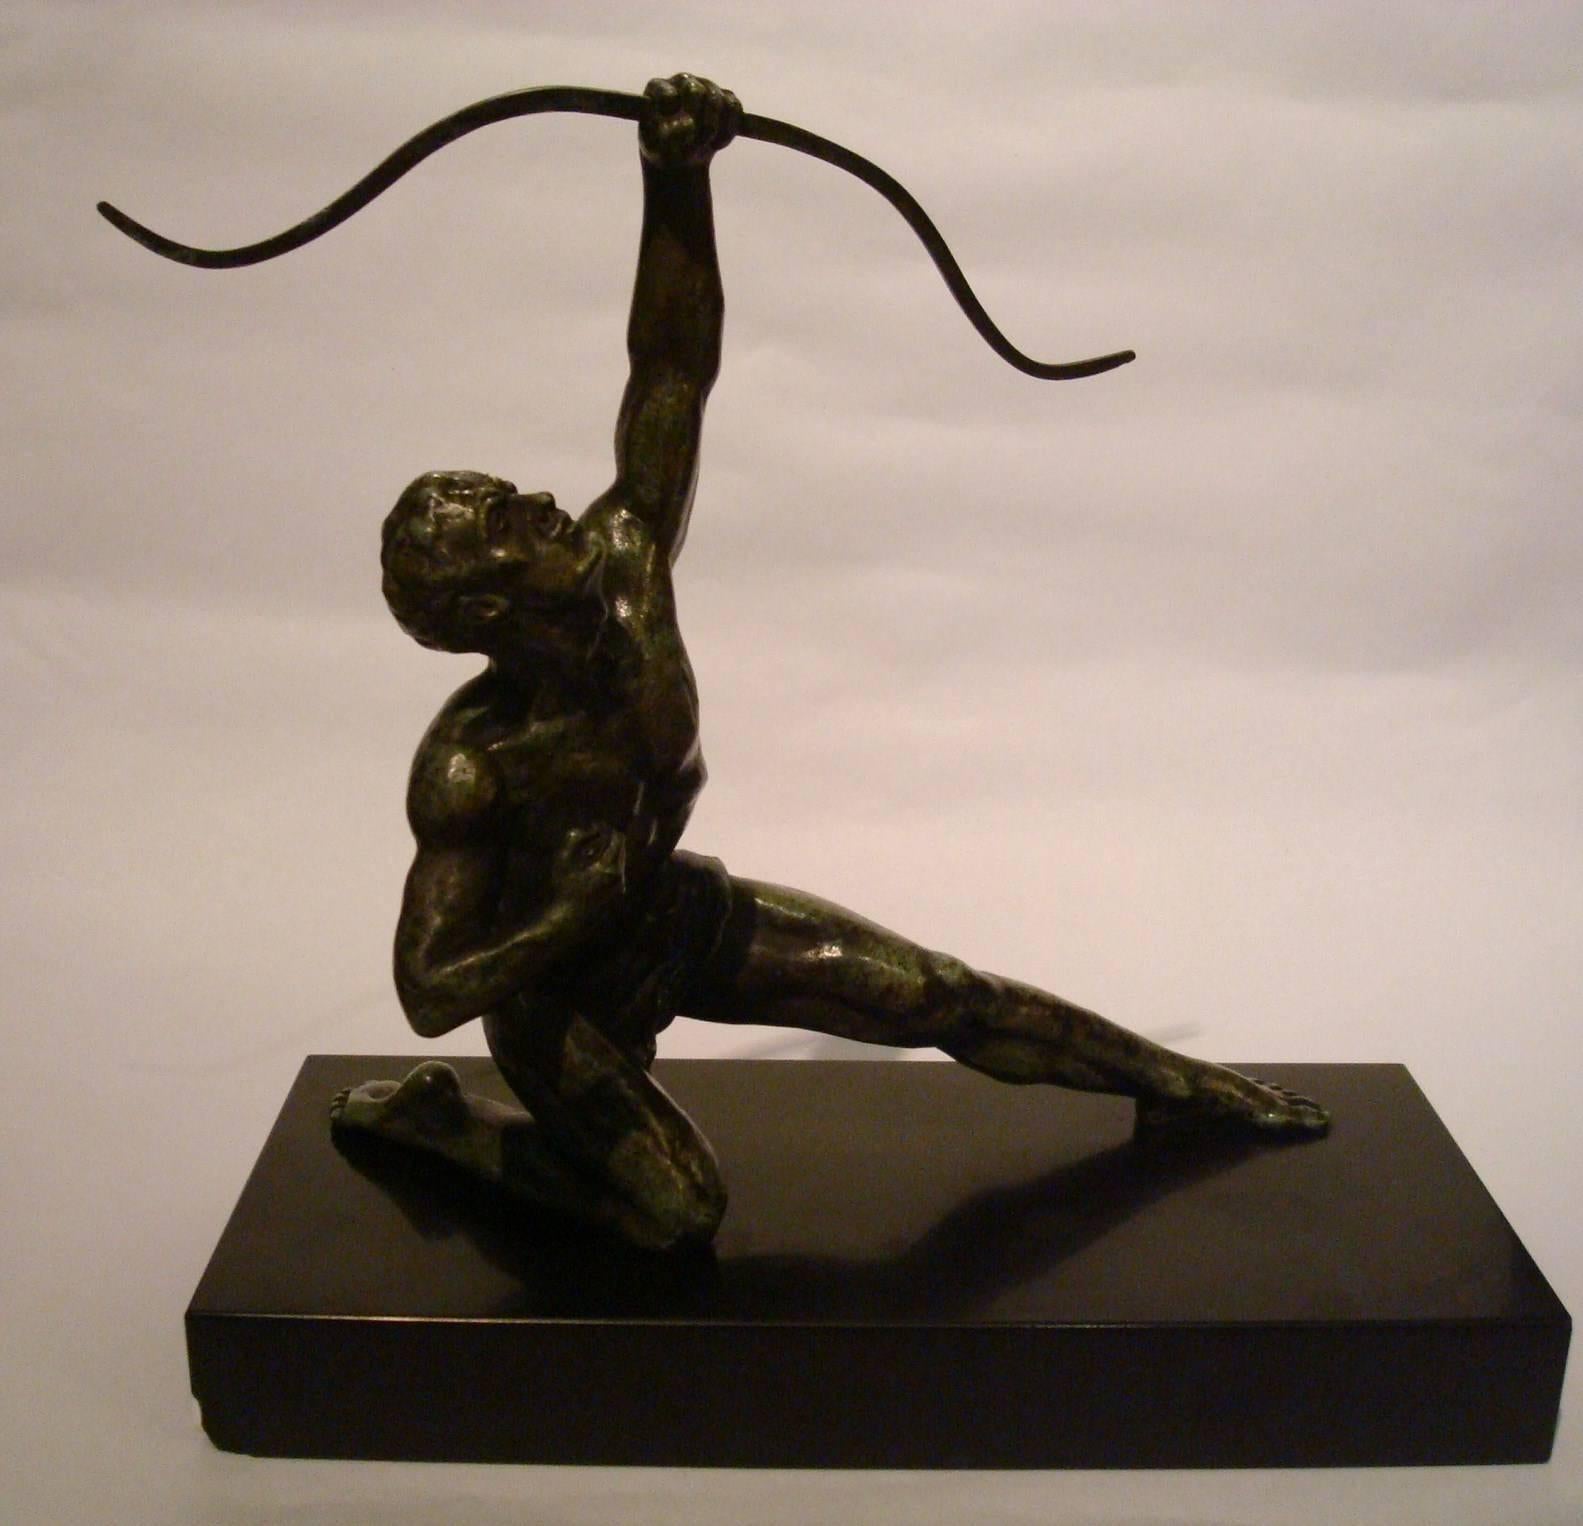 Art Deco male nude Ouline bronze archer.
Bronze archer by Belgian sculptor Alexandre Ouline. Marked bronze and signed Ouline on basis. Also Signed Casa Vignes, that’s the shop that sold it in Buenos Aires. Size is 10